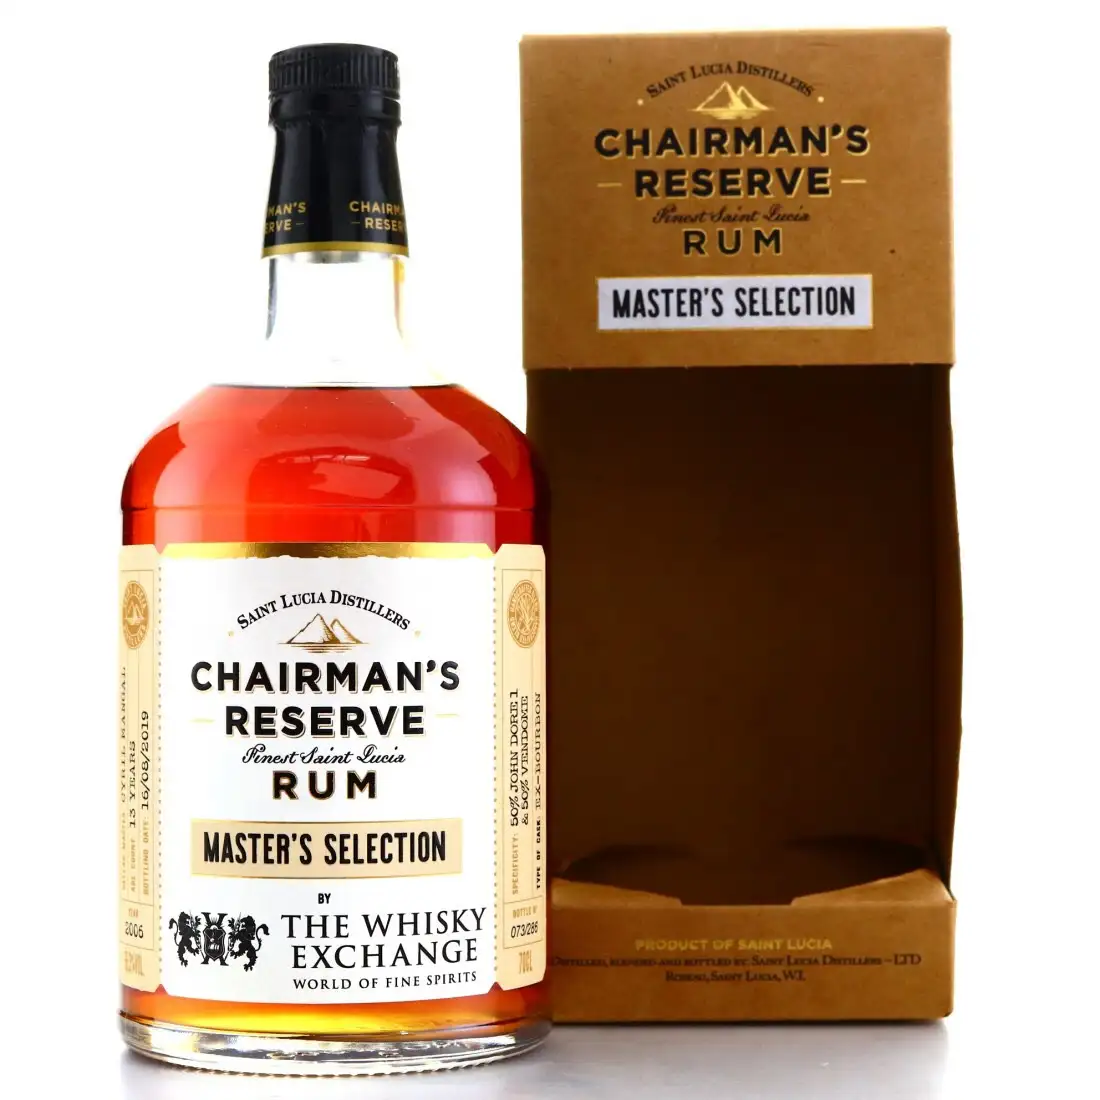 Image of the front of the bottle of the rum Chairman‘s Reserve Master‘s Selection (The Whisky Exchange)